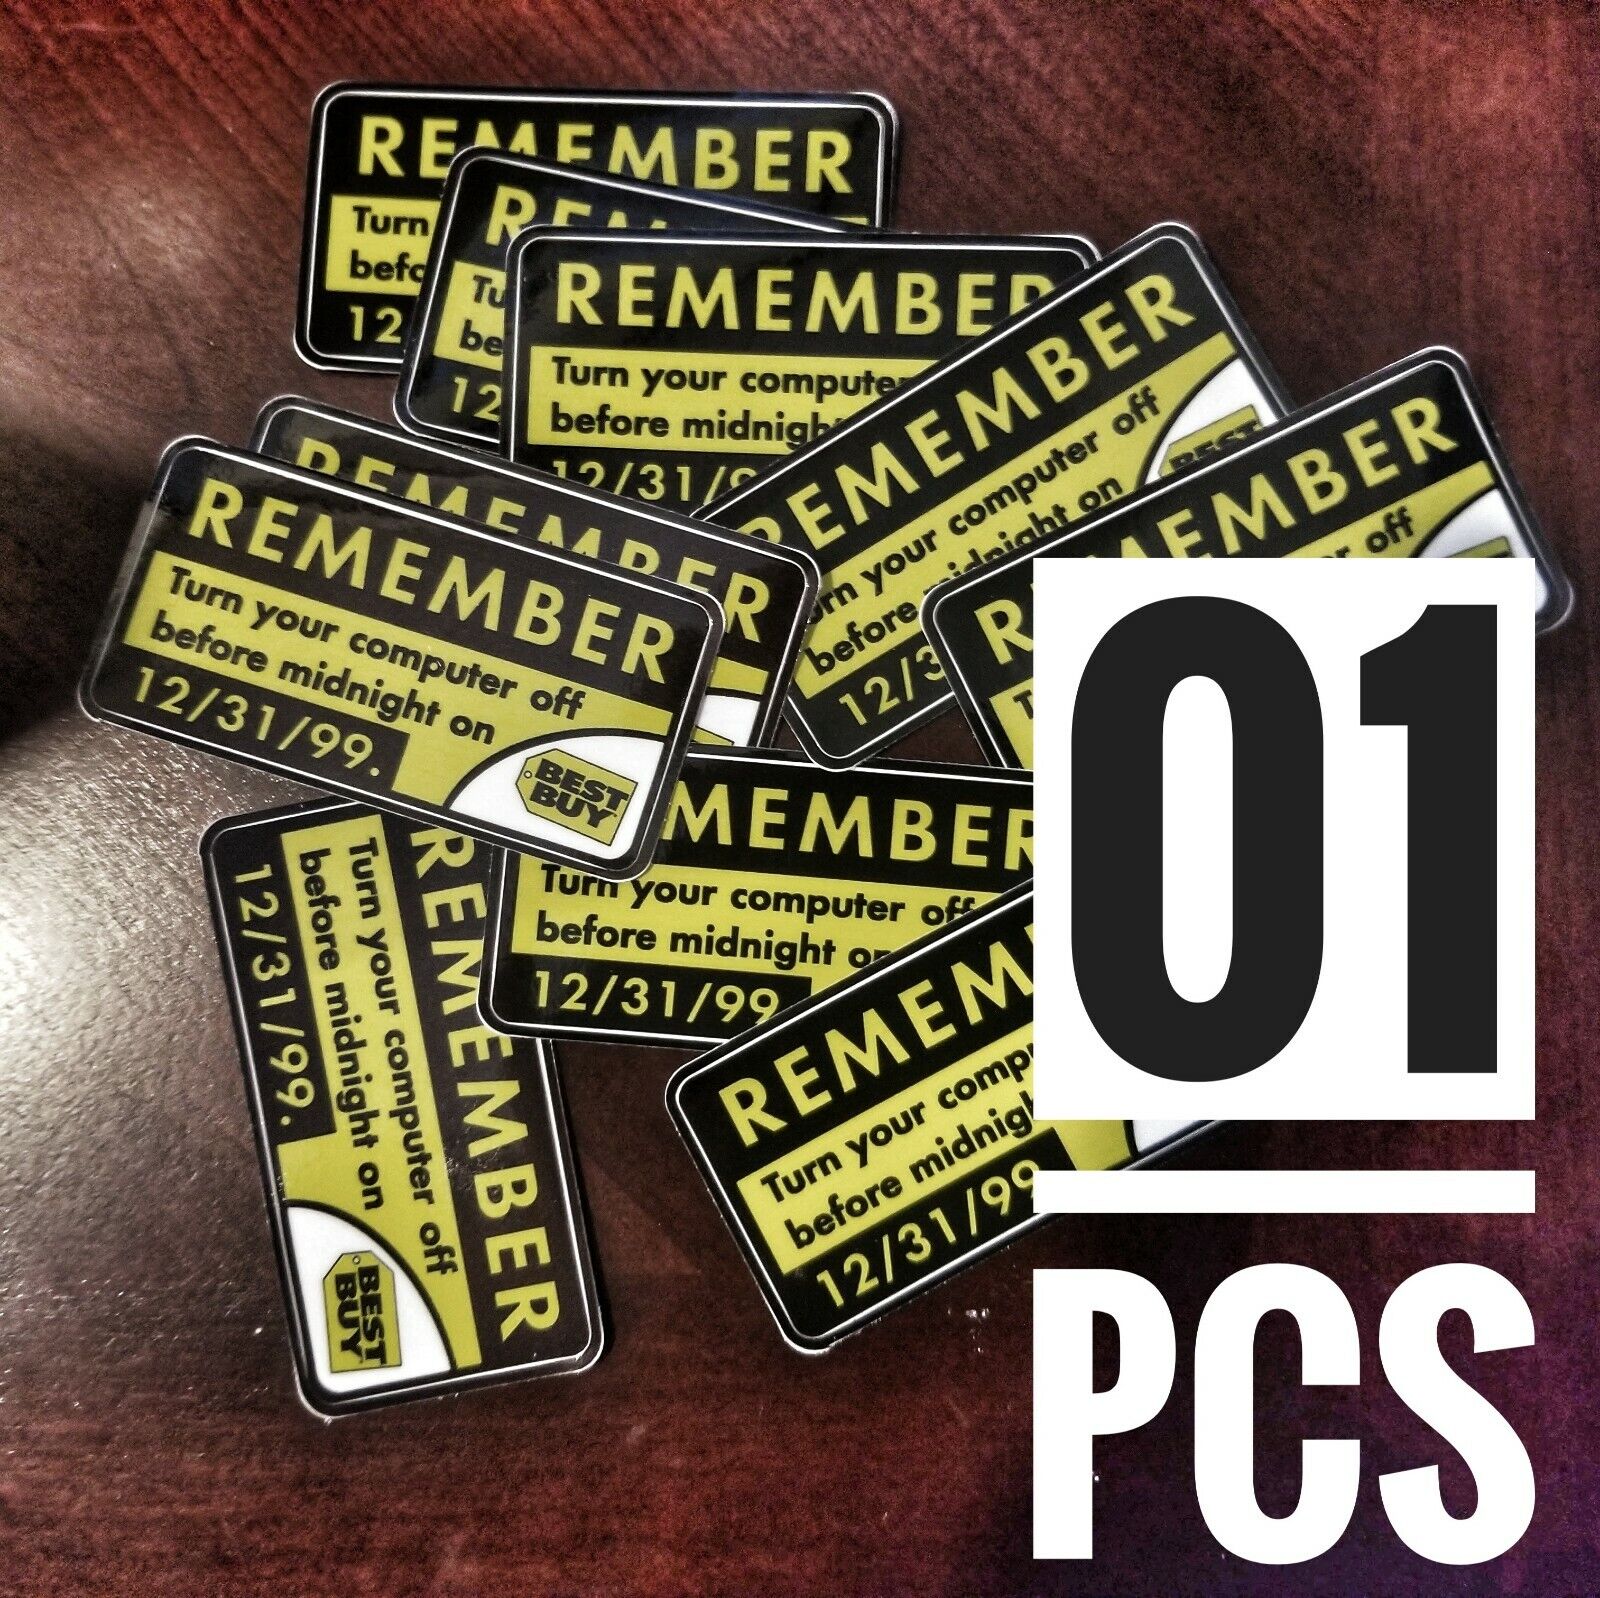 Best Buy Y2K REMEMBER Turn Your Computer Off Retro PC Case Decal Sticker 1 pcs